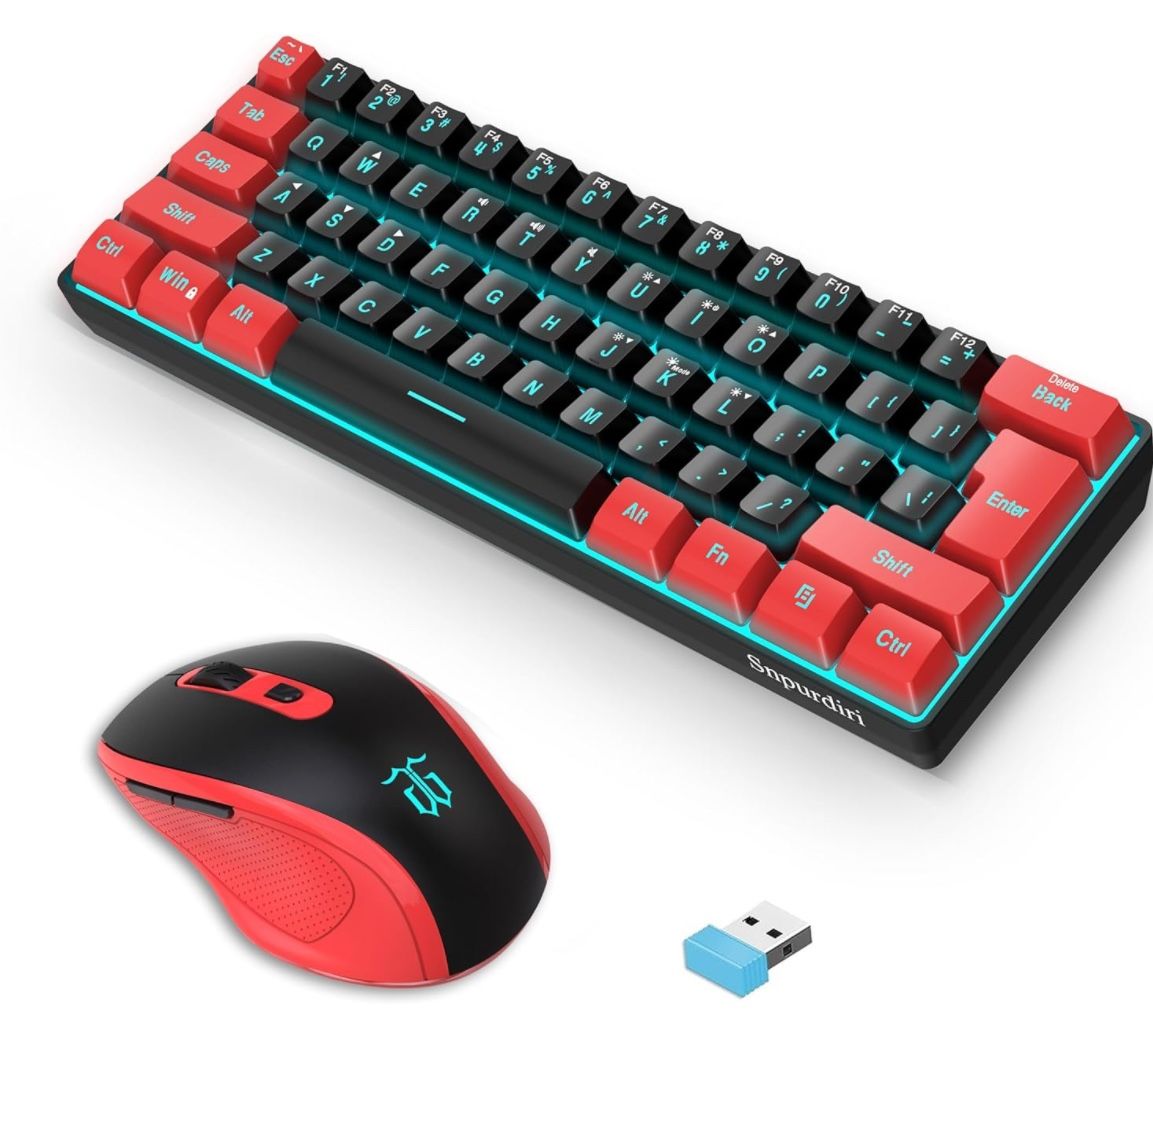 Snpurdiri 2.4G Wireless Gaming Keyboard and Mouse Comb